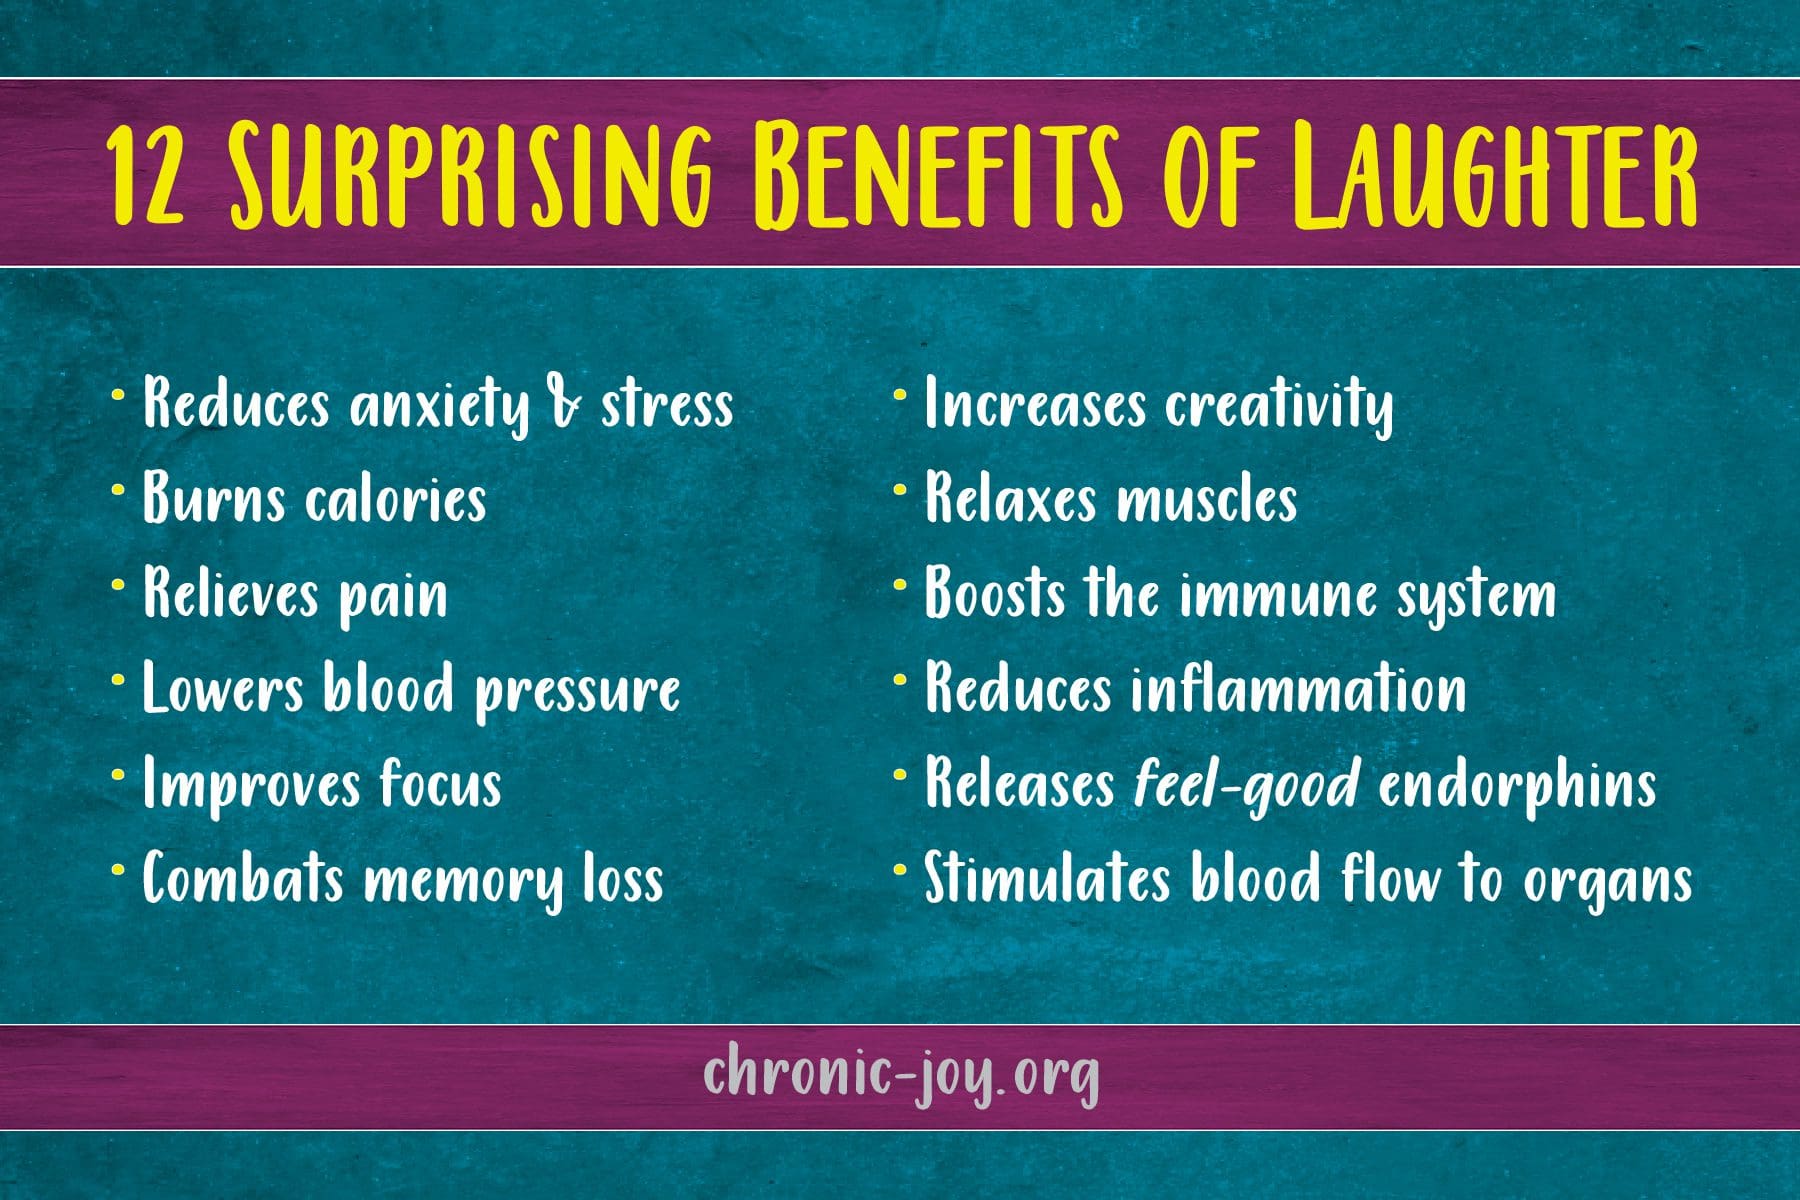 12 Surprising Benefits of Laughter